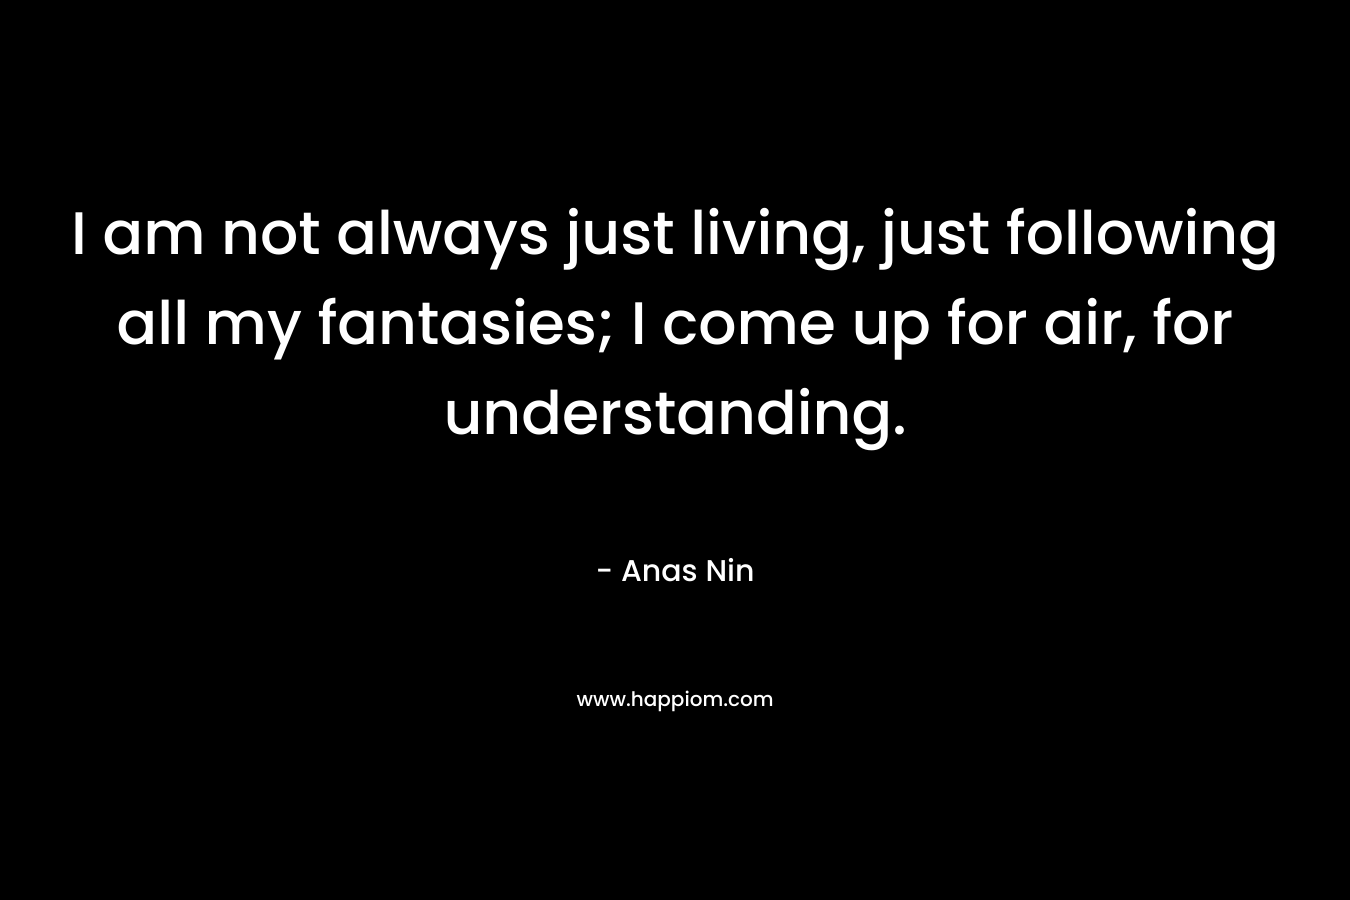 I am not always just living, just following all my fantasies; I come up for air, for understanding.